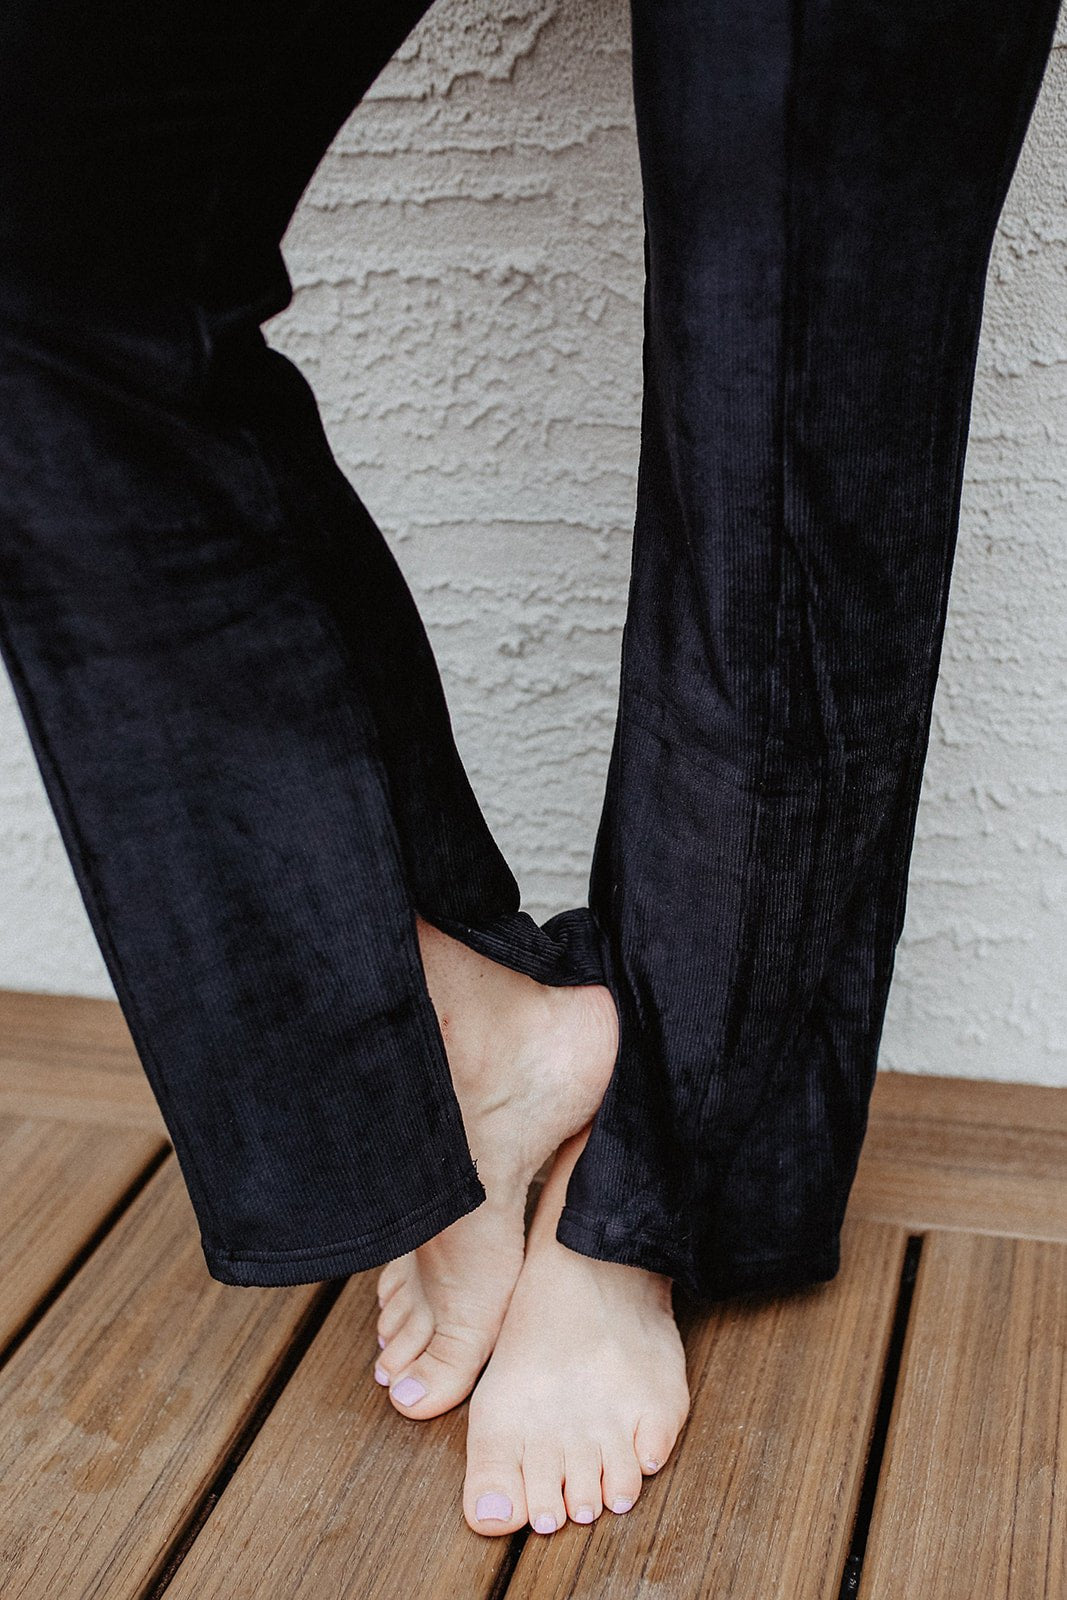 Raven Split Hem PantThe perfect blend of trendy and comfy. Made of a soft brushed corduroy fabric, these pants feature a high rise elastic waist. With plenty of stretch to keep you comfy throughout the day, you'll never want to take them off! Featuring a